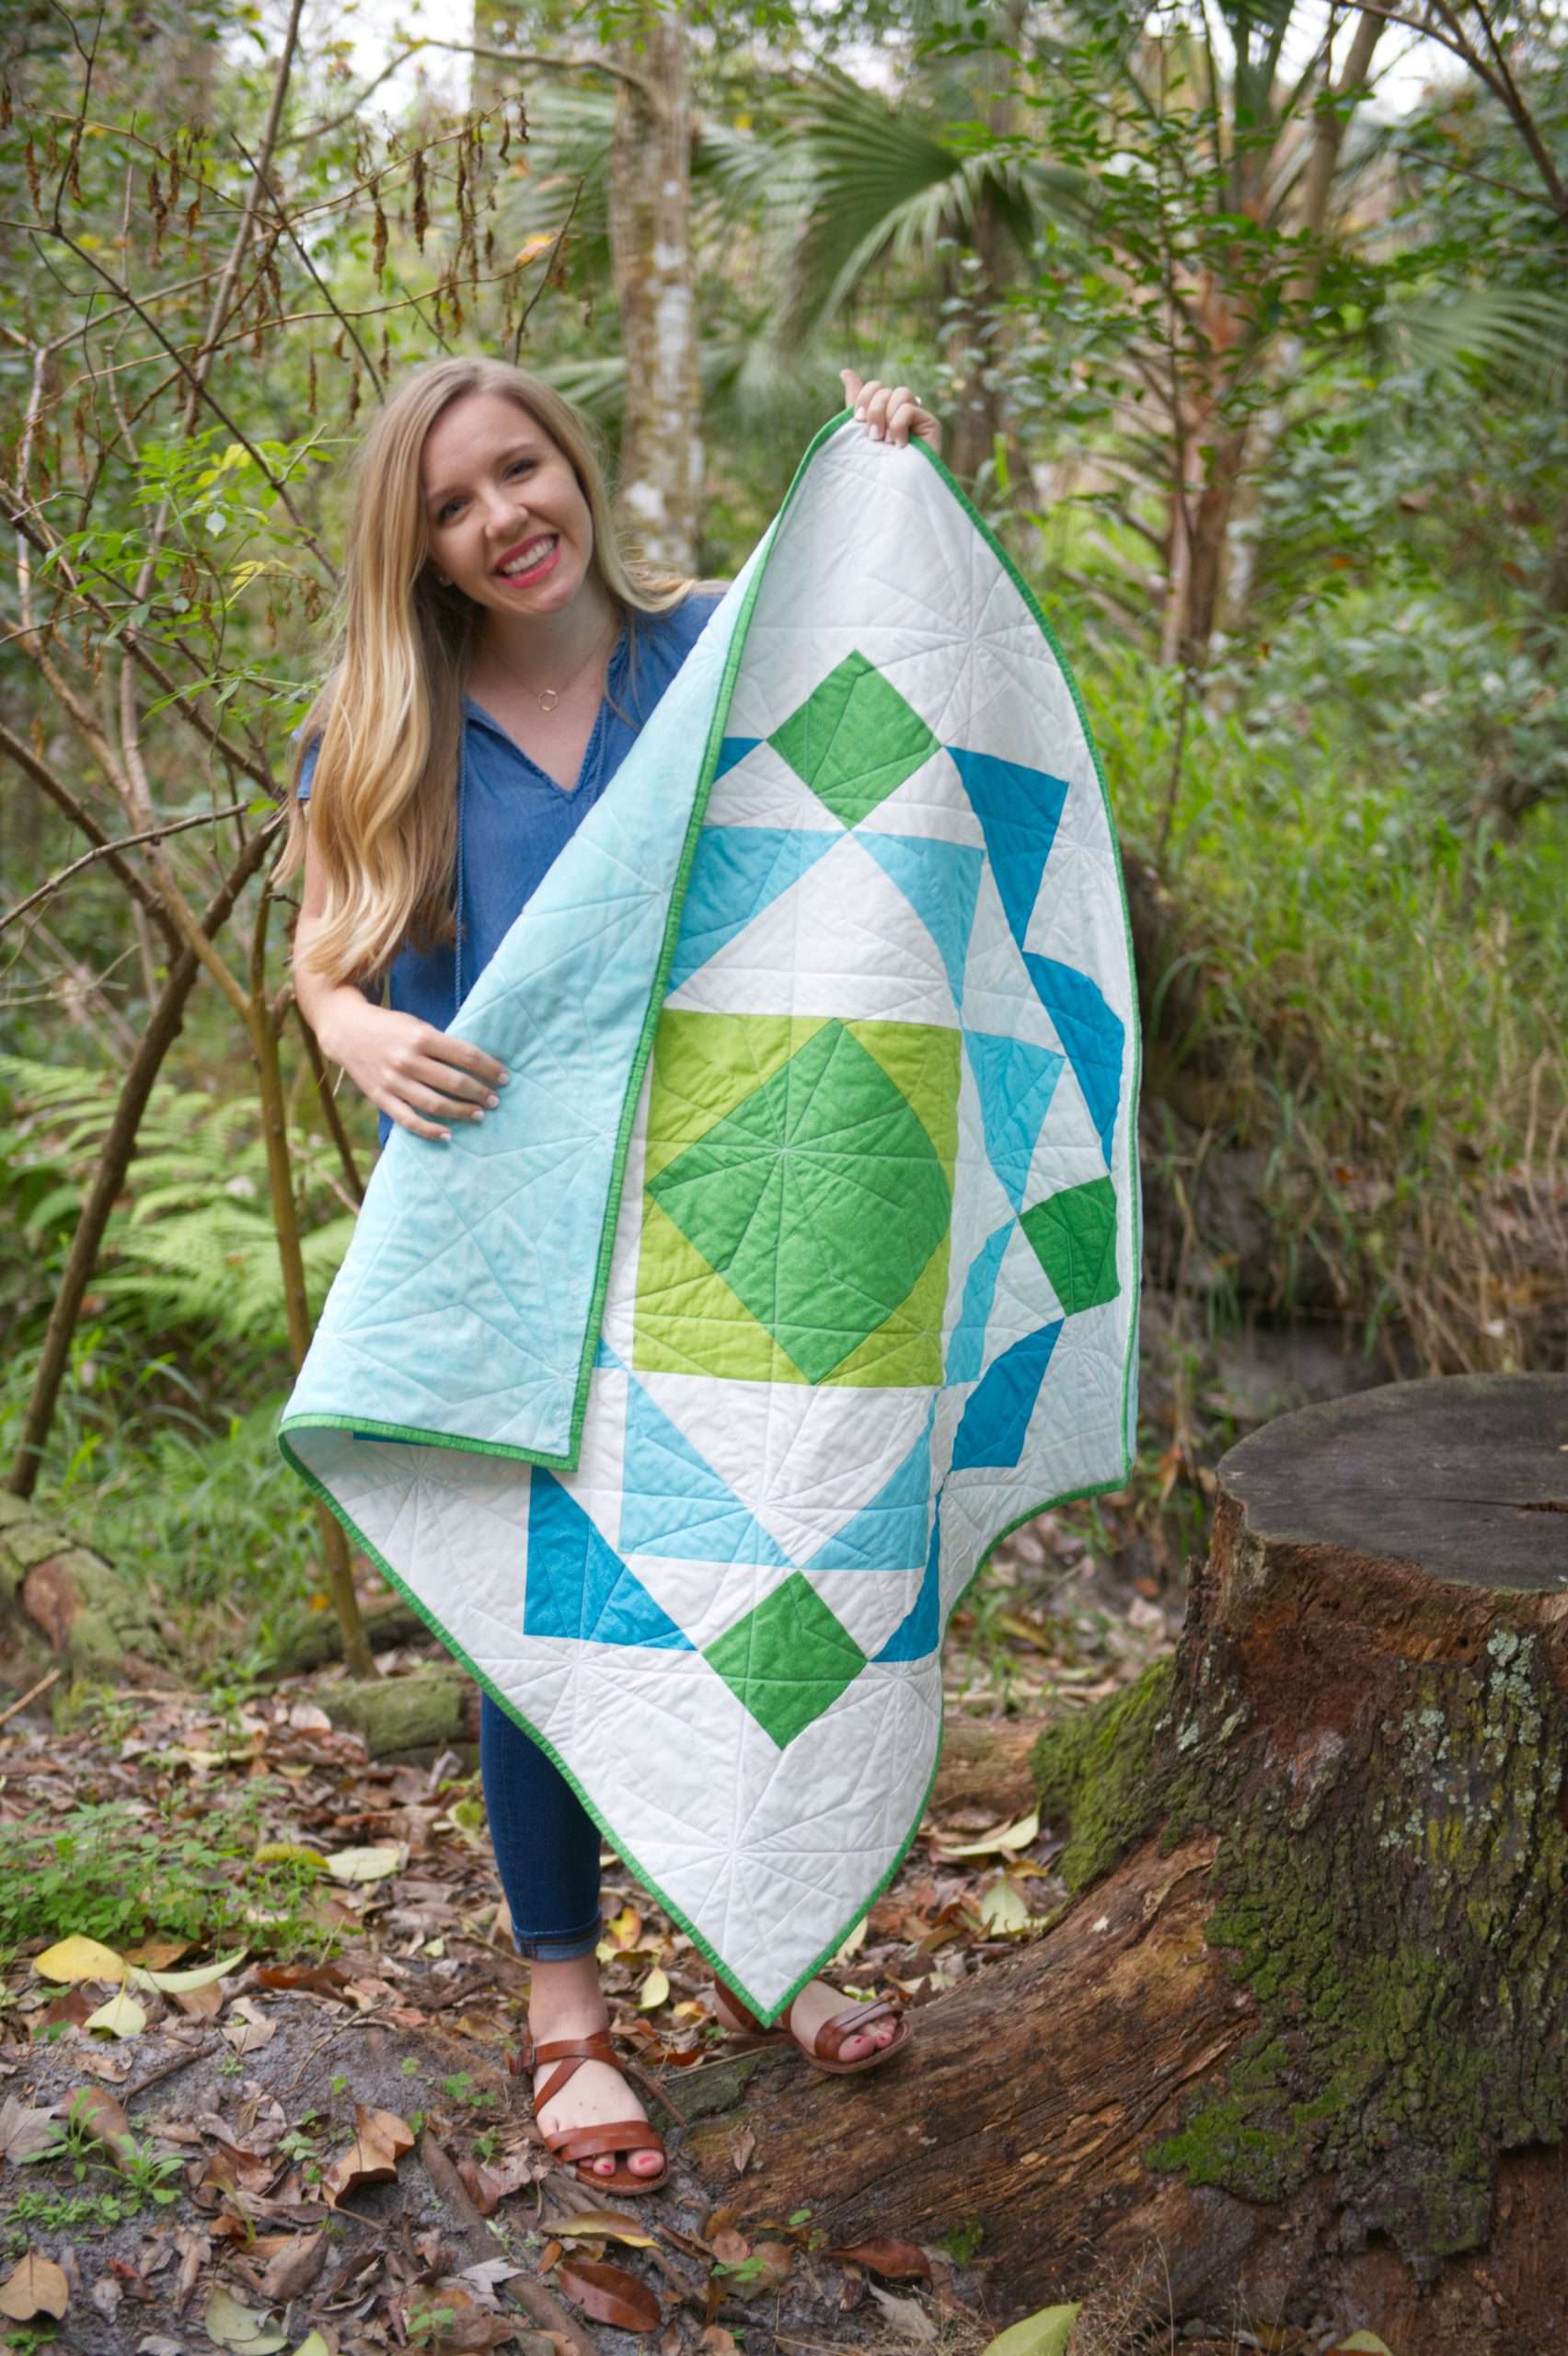 The Best Baby Quilt Patterns to Make in a Weekend